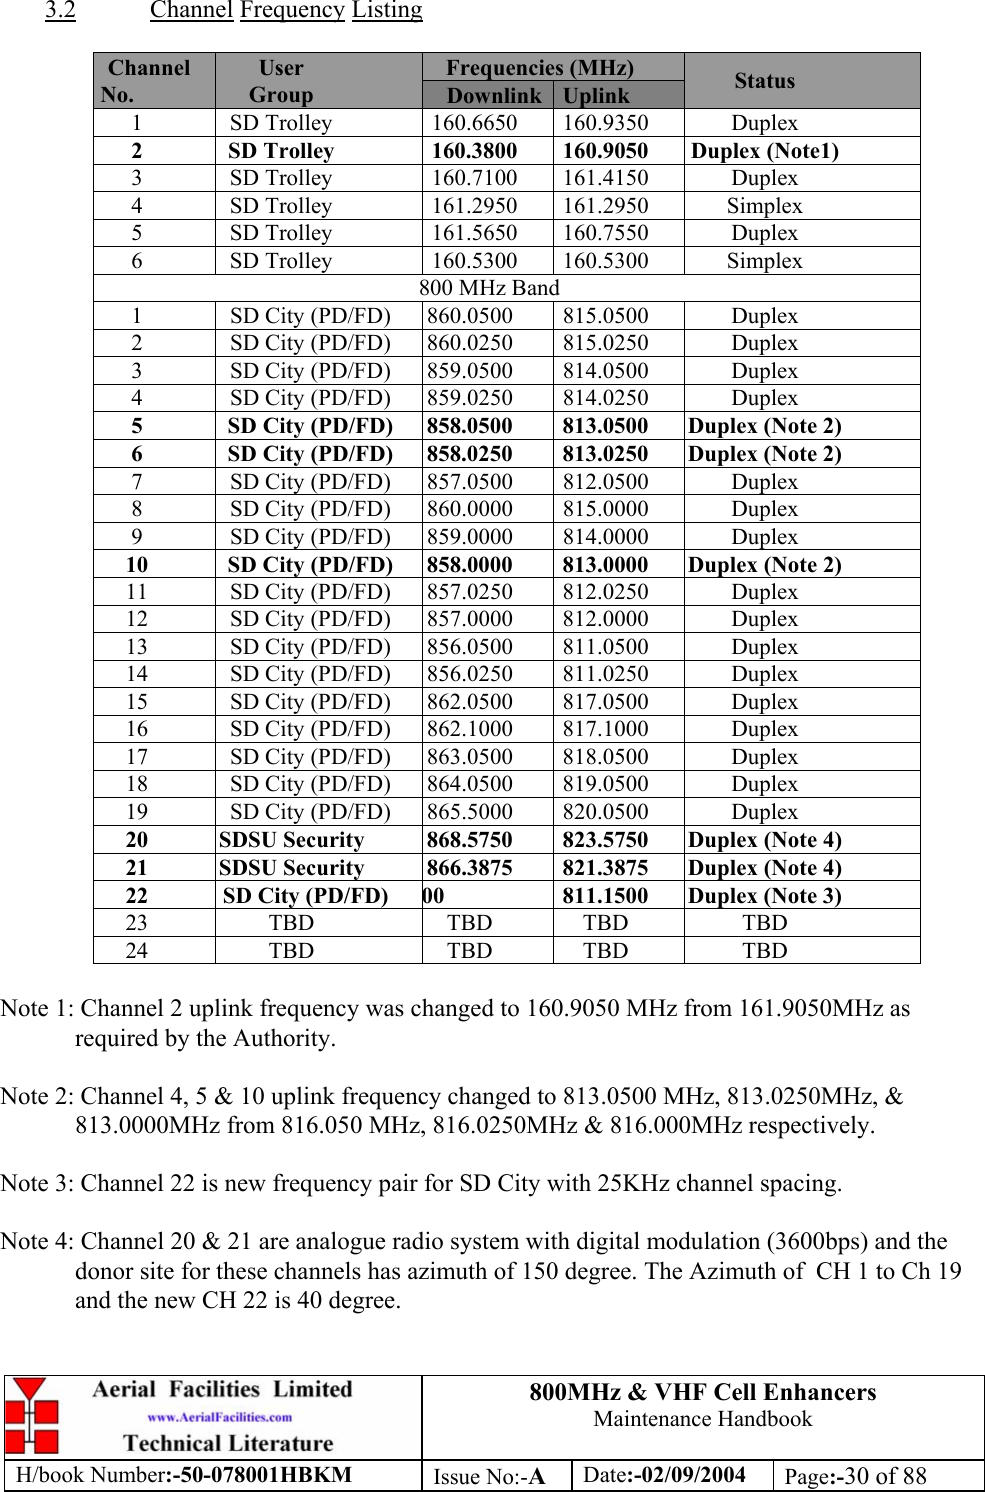 800MHz &amp; VHF Cell Enhancers Maintenance Handbook H/book Number:-50-078001HBKM Issue No:-A Date:-02/09/2004 Page:-30 of 88   3.2 Channel Frequency Listing  Frequencies (MHz) Channel No.  User Group  Downlink  Uplink  Status 1 SD Trolley  160.6650 160.9350 Duplex 2  SD Trolley  160.3800  160.9050  Duplex (Note1) 3 SD Trolley  160.7100 161.4150 Duplex 4 SD Trolley  161.2950 161.2950 Simplex 5 SD Trolley  161.5650 160.7550 Duplex 6 SD Trolley  160.5300 160.5300 Simplex 800 MHz Band 1  SD City (PD/FD)  860.0500  815.0500  Duplex 2  SD City (PD/FD)  860.0250  815.0250  Duplex 3  SD City (PD/FD)  859.0500  814.0500  Duplex 4  SD City (PD/FD)  859.0250  814.0250  Duplex 5  SD City (PD/FD)  858.0500  813.0500  Duplex (Note 2) 6  SD City (PD/FD)  858.0250  813.0250  Duplex (Note 2) 7  SD City (PD/FD)  857.0500  812.0500  Duplex 8  SD City (PD/FD)  860.0000  815.0000  Duplex 9  SD City (PD/FD)  859.0000  814.0000  Duplex 10  SD City (PD/FD)  858.0000  813.0000  Duplex (Note 2) 11  SD City (PD/FD)  857.0250  812.0250  Duplex 12  SD City (PD/FD)  857.0000  812.0000  Duplex 13  SD City (PD/FD)  856.0500  811.0500  Duplex 14  SD City (PD/FD)  856.0250  811.0250  Duplex 15  SD City (PD/FD)  862.0500  817.0500  Duplex 16  SD City (PD/FD)  862.1000  817.1000  Duplex 17  SD City (PD/FD)  863.0500  818.0500  Duplex 18  SD City (PD/FD)  864.0500  819.0500  Duplex 19  SD City (PD/FD)  865.5000  820.0500  Duplex 20  SDSU Security  868.5750  823.5750  Duplex (Note 4) 21  SDSU Security  866.3875  821.3875  Duplex (Note 4) 22  SD City (PD/FD) 00  811.1500  Duplex (Note 3) 23 TBD  TBD TBD TBD 24 TBD  TBD TBD TBD  Note 1: Channel 2 uplink frequency was changed to 160.9050 MHz from 161.9050MHz as required by the Authority.   Note 2: Channel 4, 5 &amp; 10 uplink frequency changed to 813.0500 MHz, 813.0250MHz, &amp; 813.0000MHz from 816.050 MHz, 816.0250MHz &amp; 816.000MHz respectively.  Note 3: Channel 22 is new frequency pair for SD City with 25KHz channel spacing.  Note 4: Channel 20 &amp; 21 are analogue radio system with digital modulation (3600bps) and the donor site for these channels has azimuth of 150 degree. The Azimuth of  CH 1 to Ch 19 and the new CH 22 is 40 degree. 